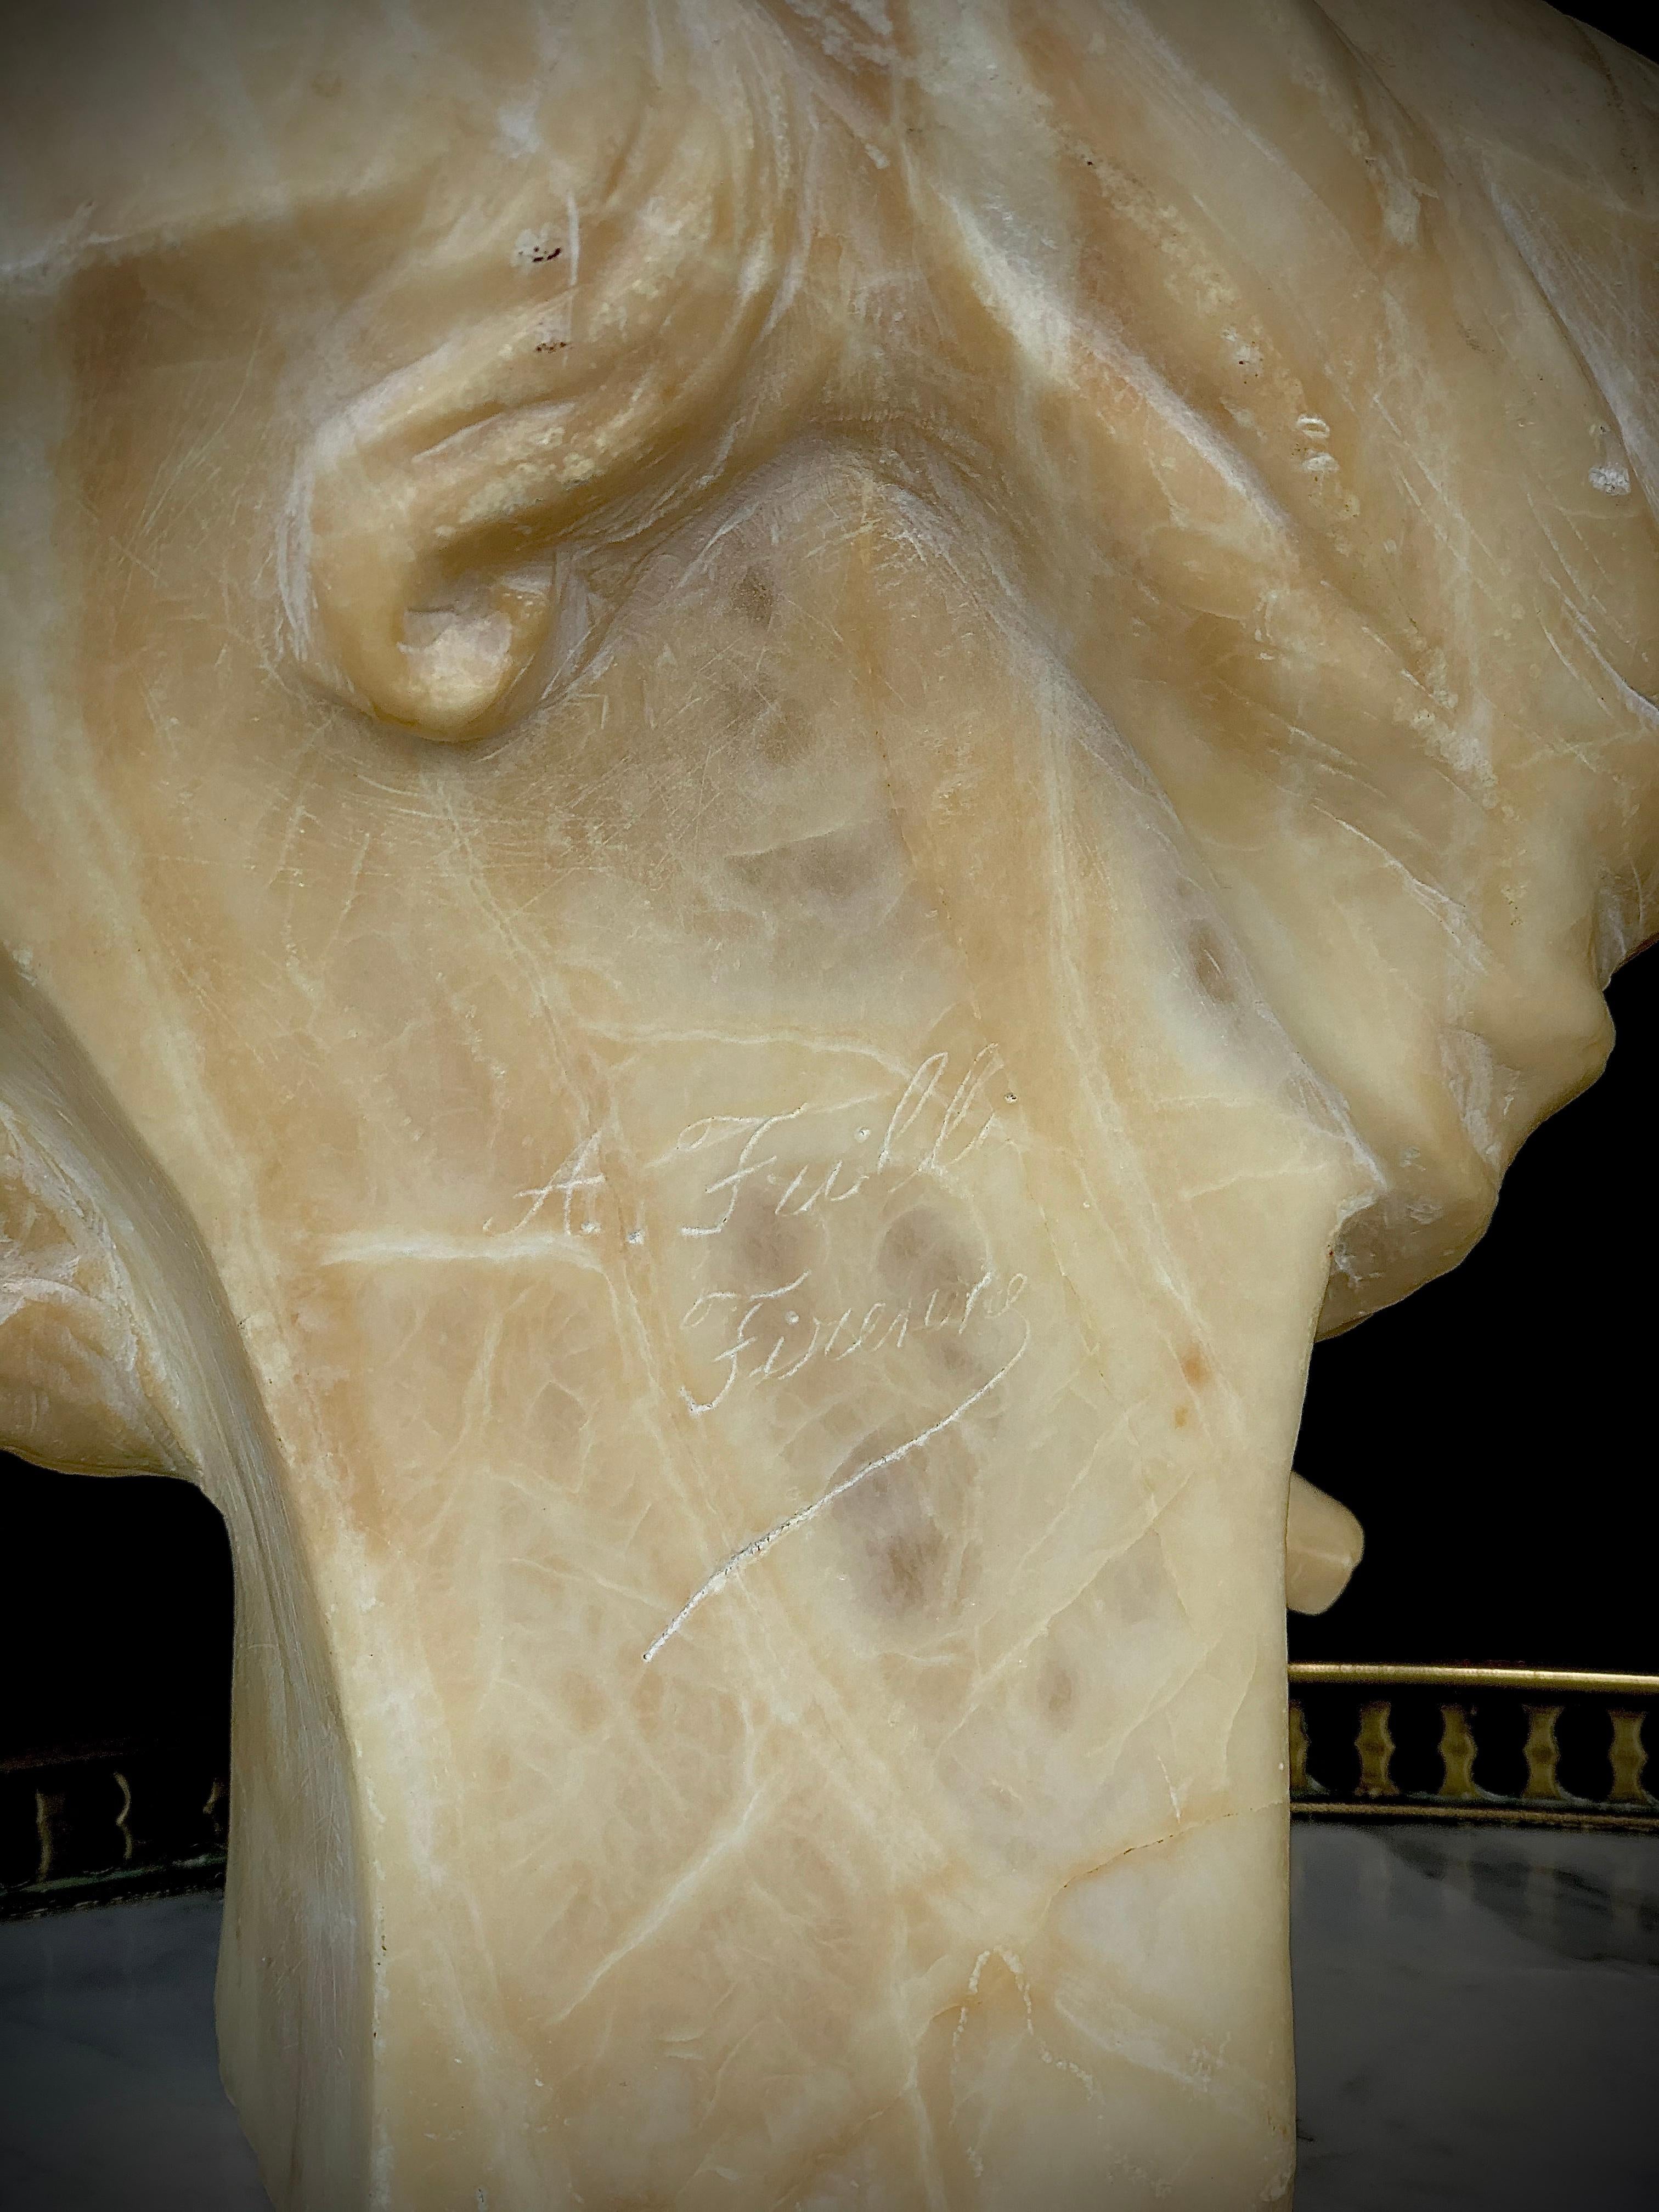 19th Century Antonio Frill Carved Alabaster Bust In Good Condition For Sale In Nashville, TN